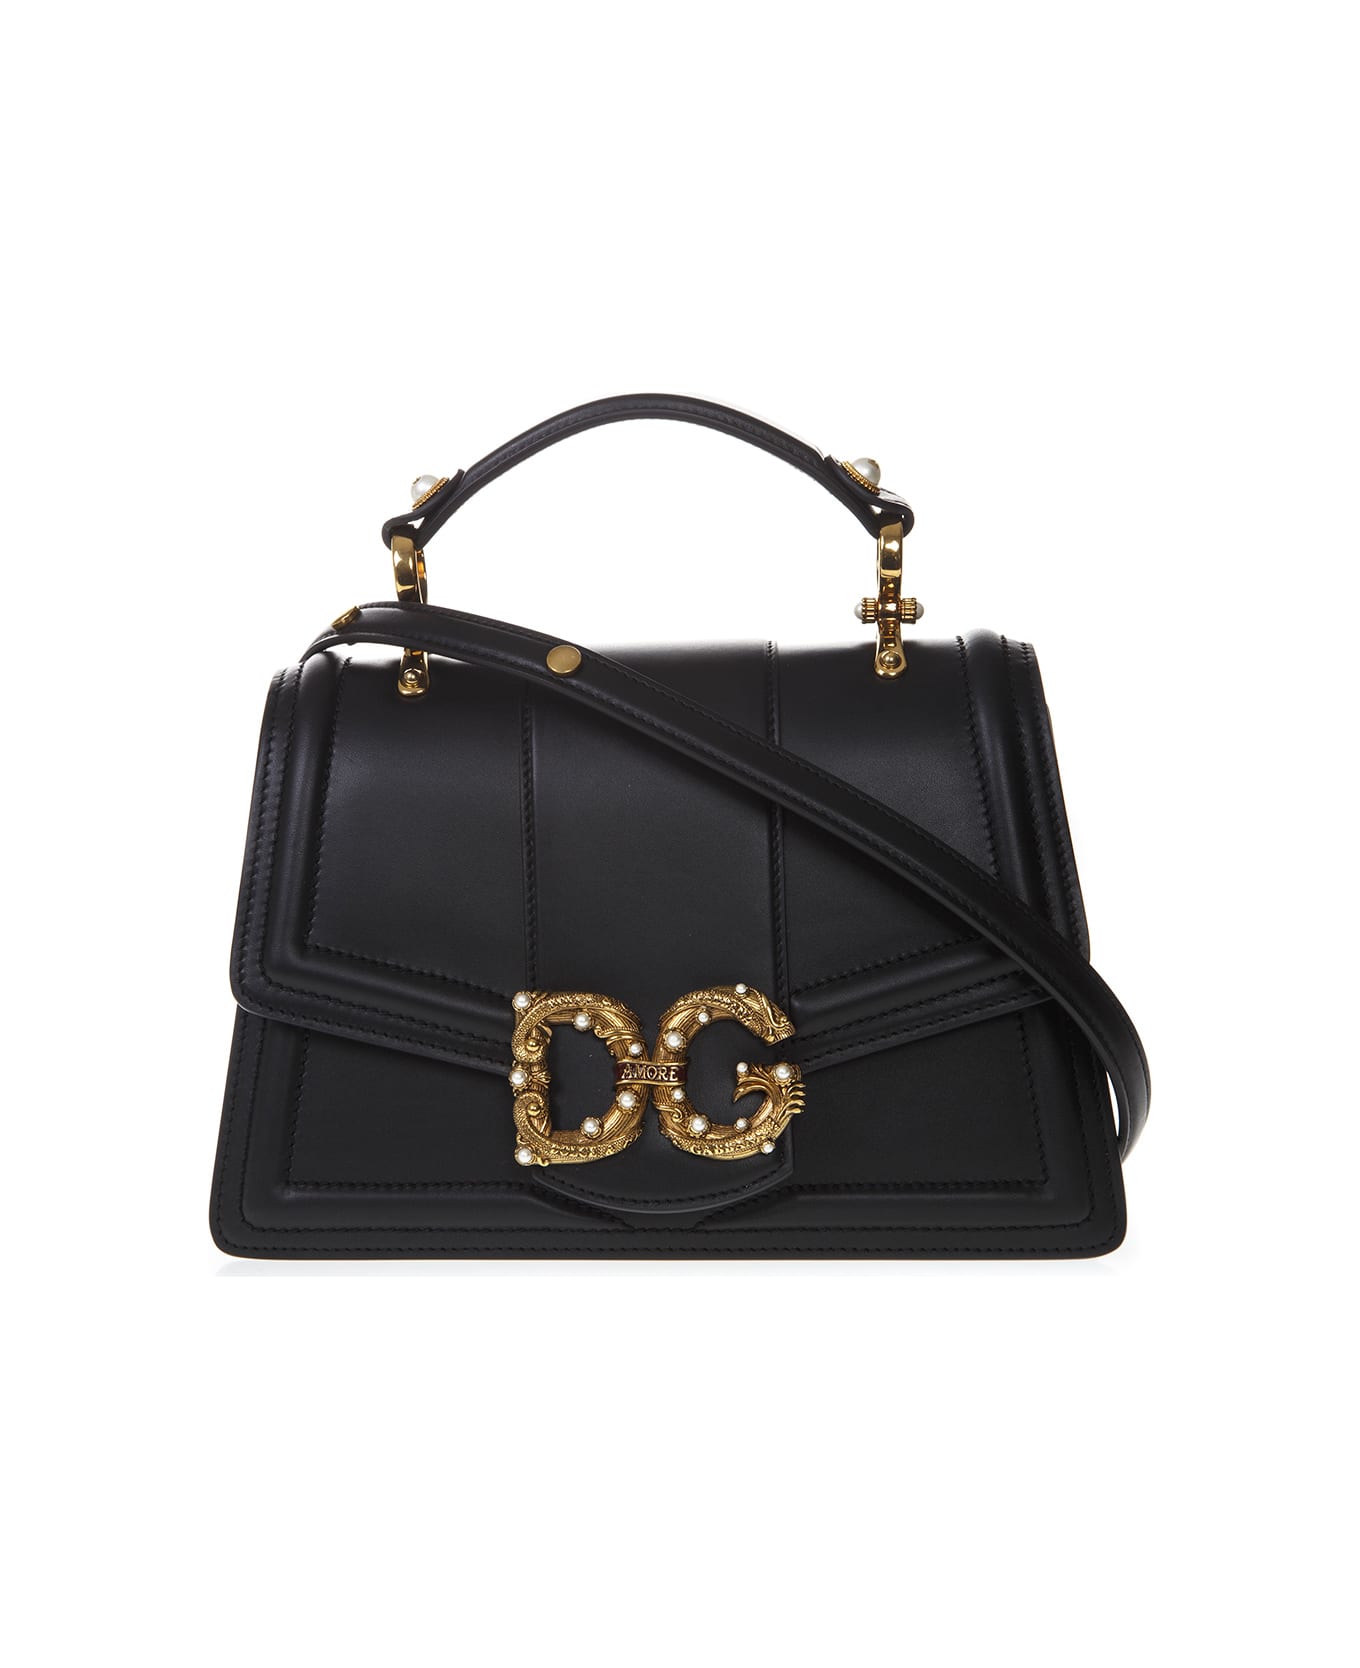 Dolce & Gabbana Amore Bag In Black Leather With Logo | italist, ALWAYS ...